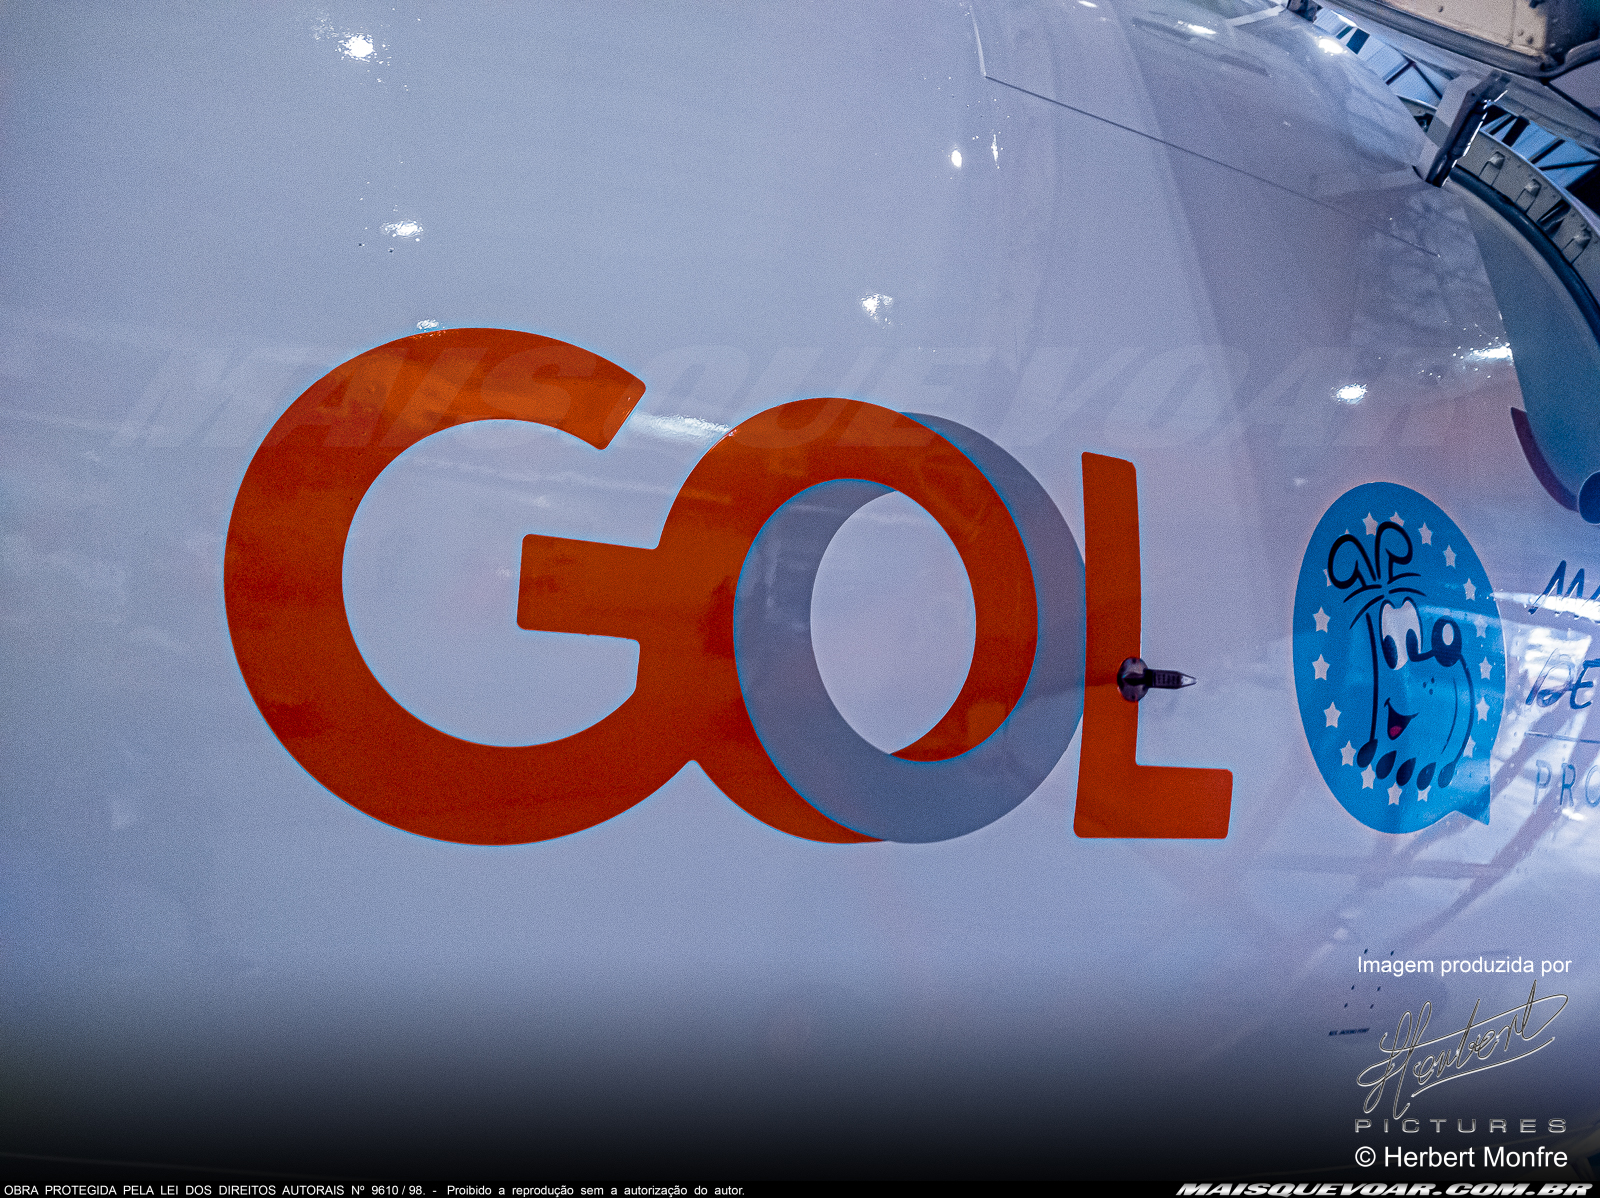 GOL and Mauricio de Sousa Produções launch themed plane "Mônica 60" - PR-GXW | MORE THAN FLY - Aviation and News | Photo © Herbert Monfre - Aviation and Events Specialist Photographer - Hire the photographer for your event at cmsherbert@hotmail.com.